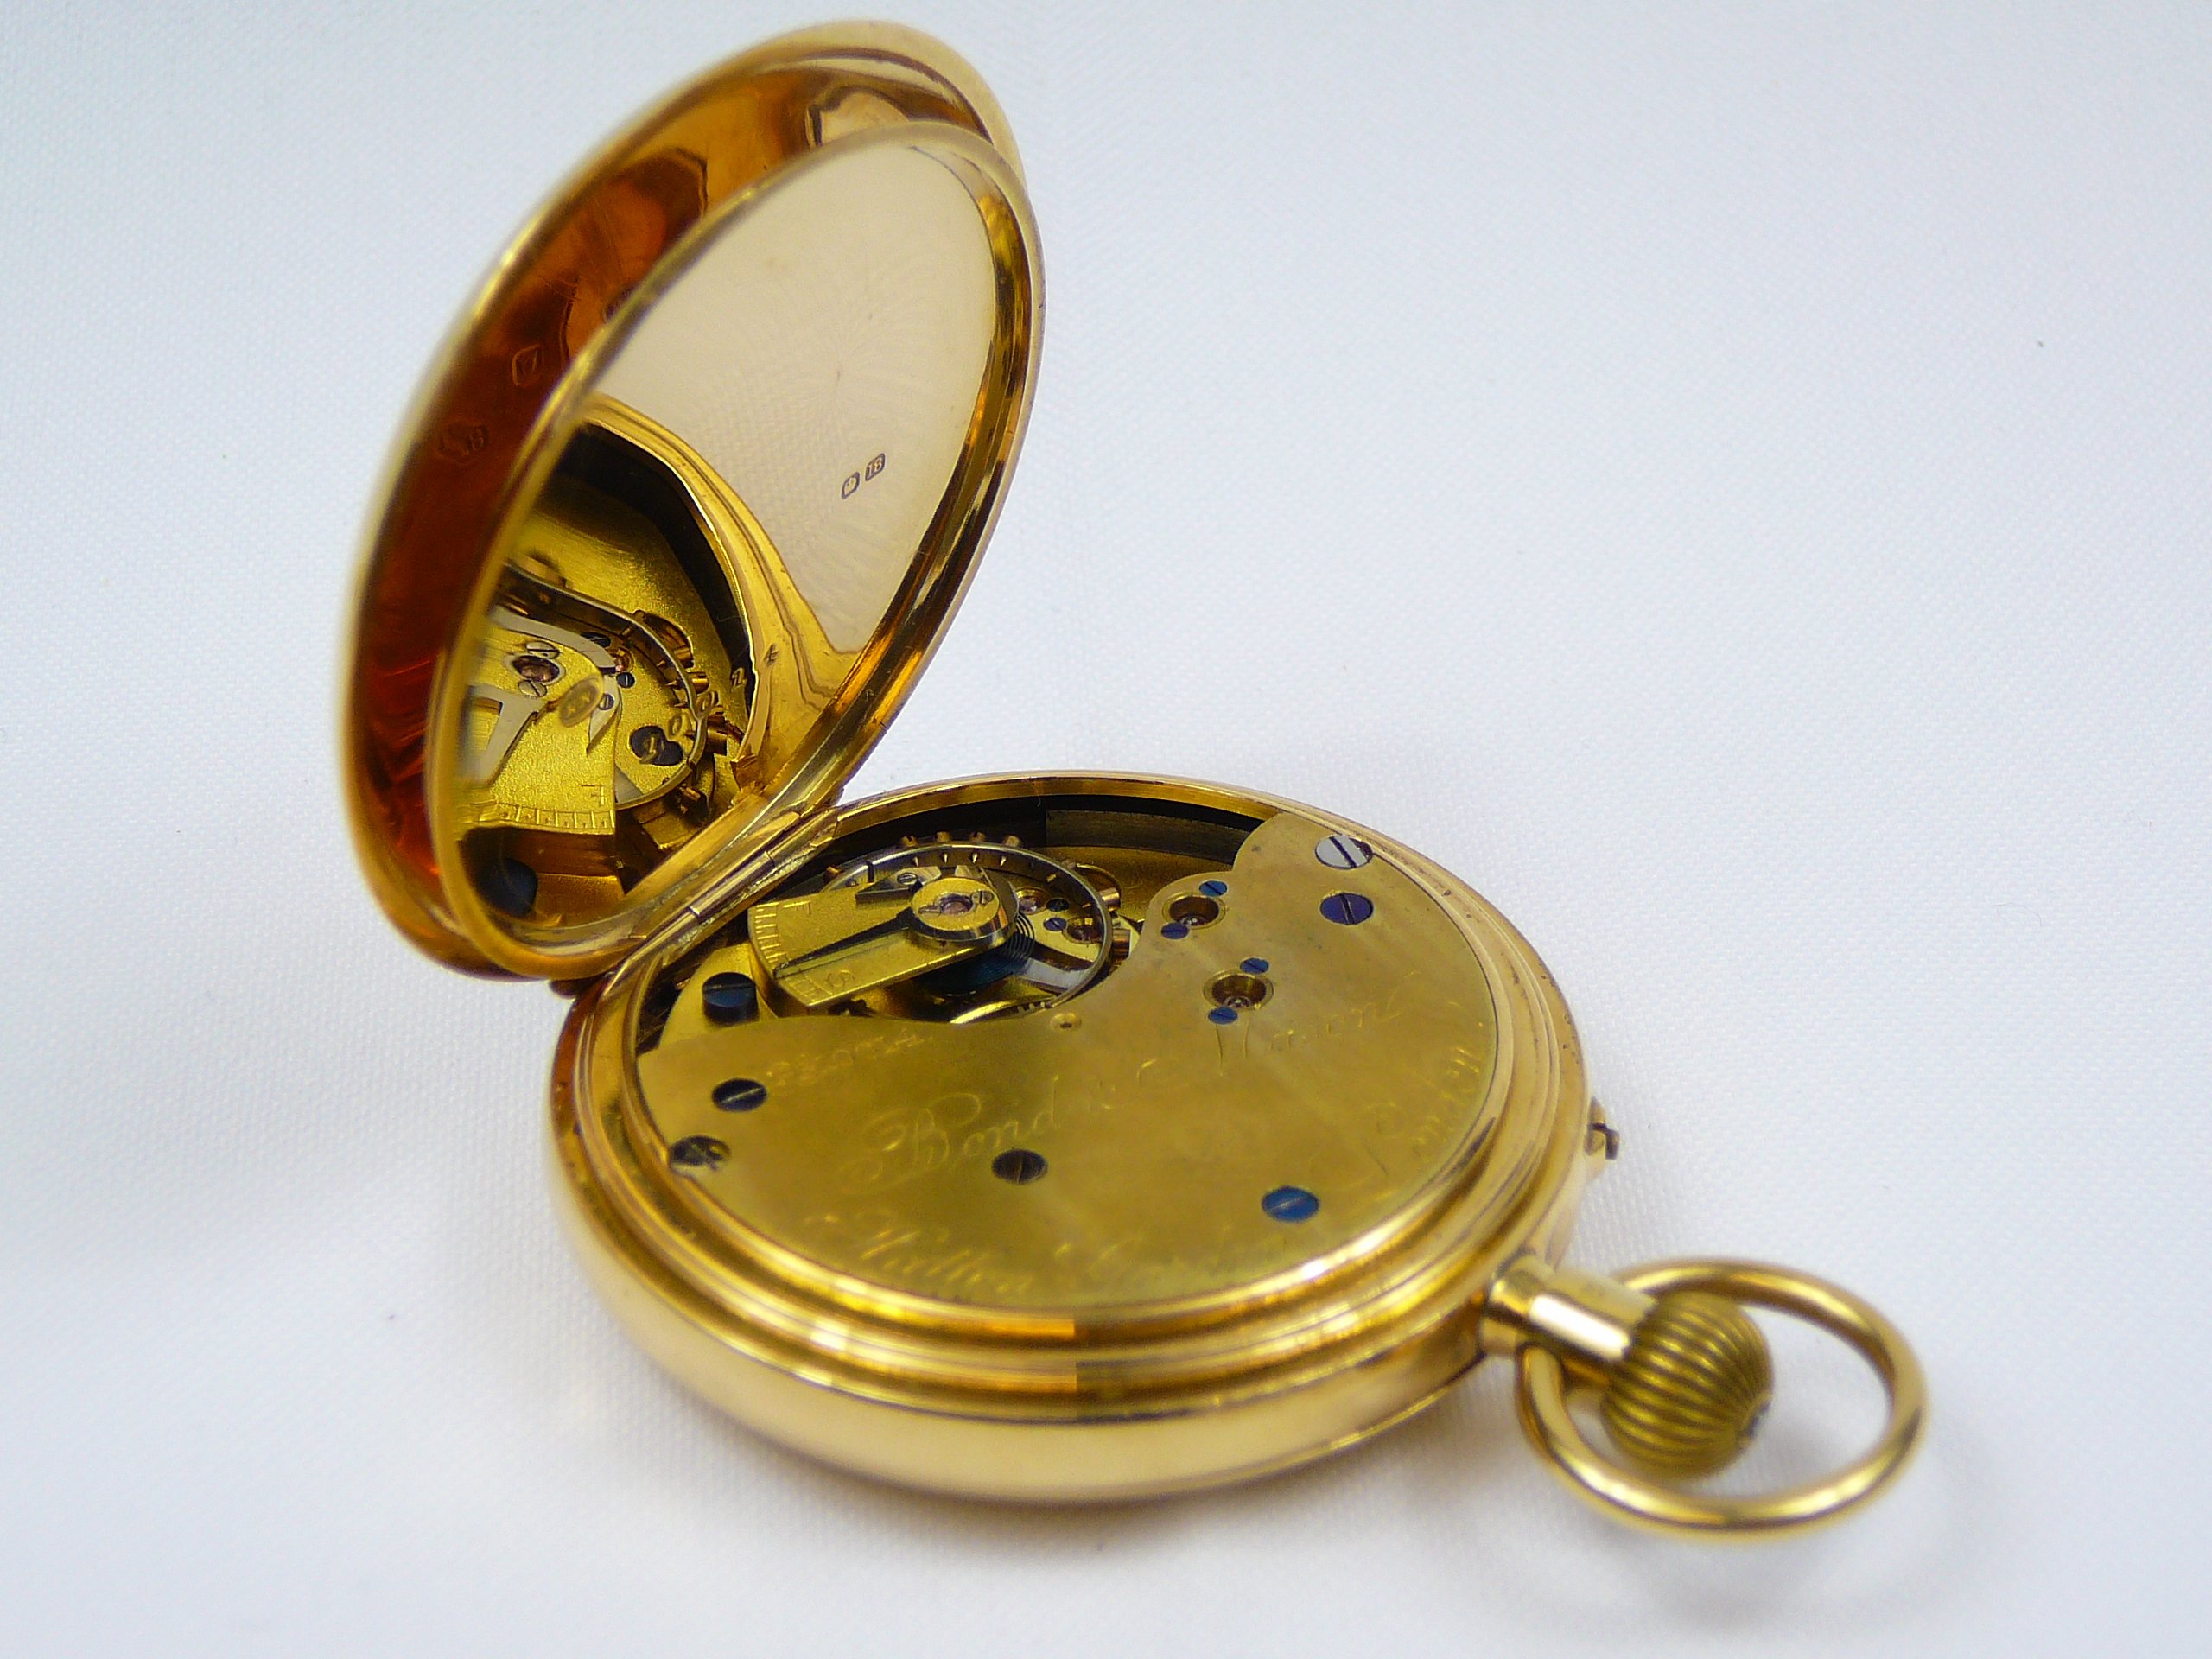 Gents gold pocket watch - Image 6 of 7